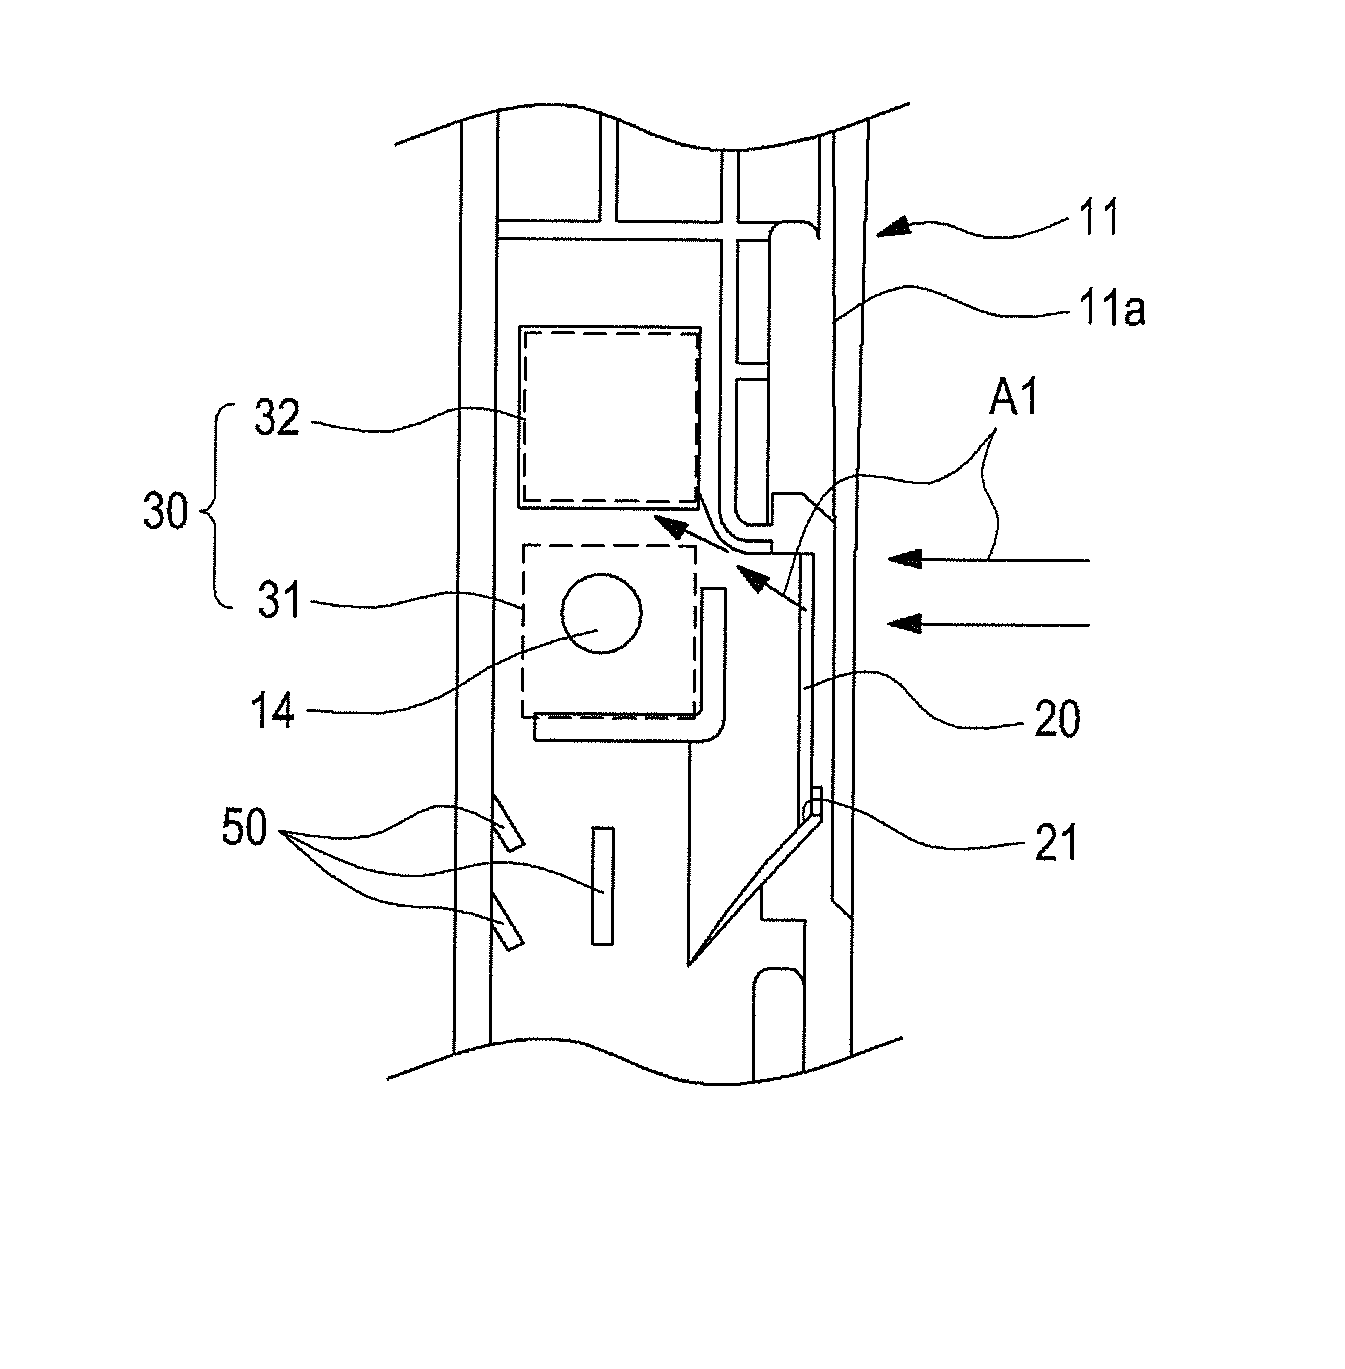 Wet-label device for electronic device